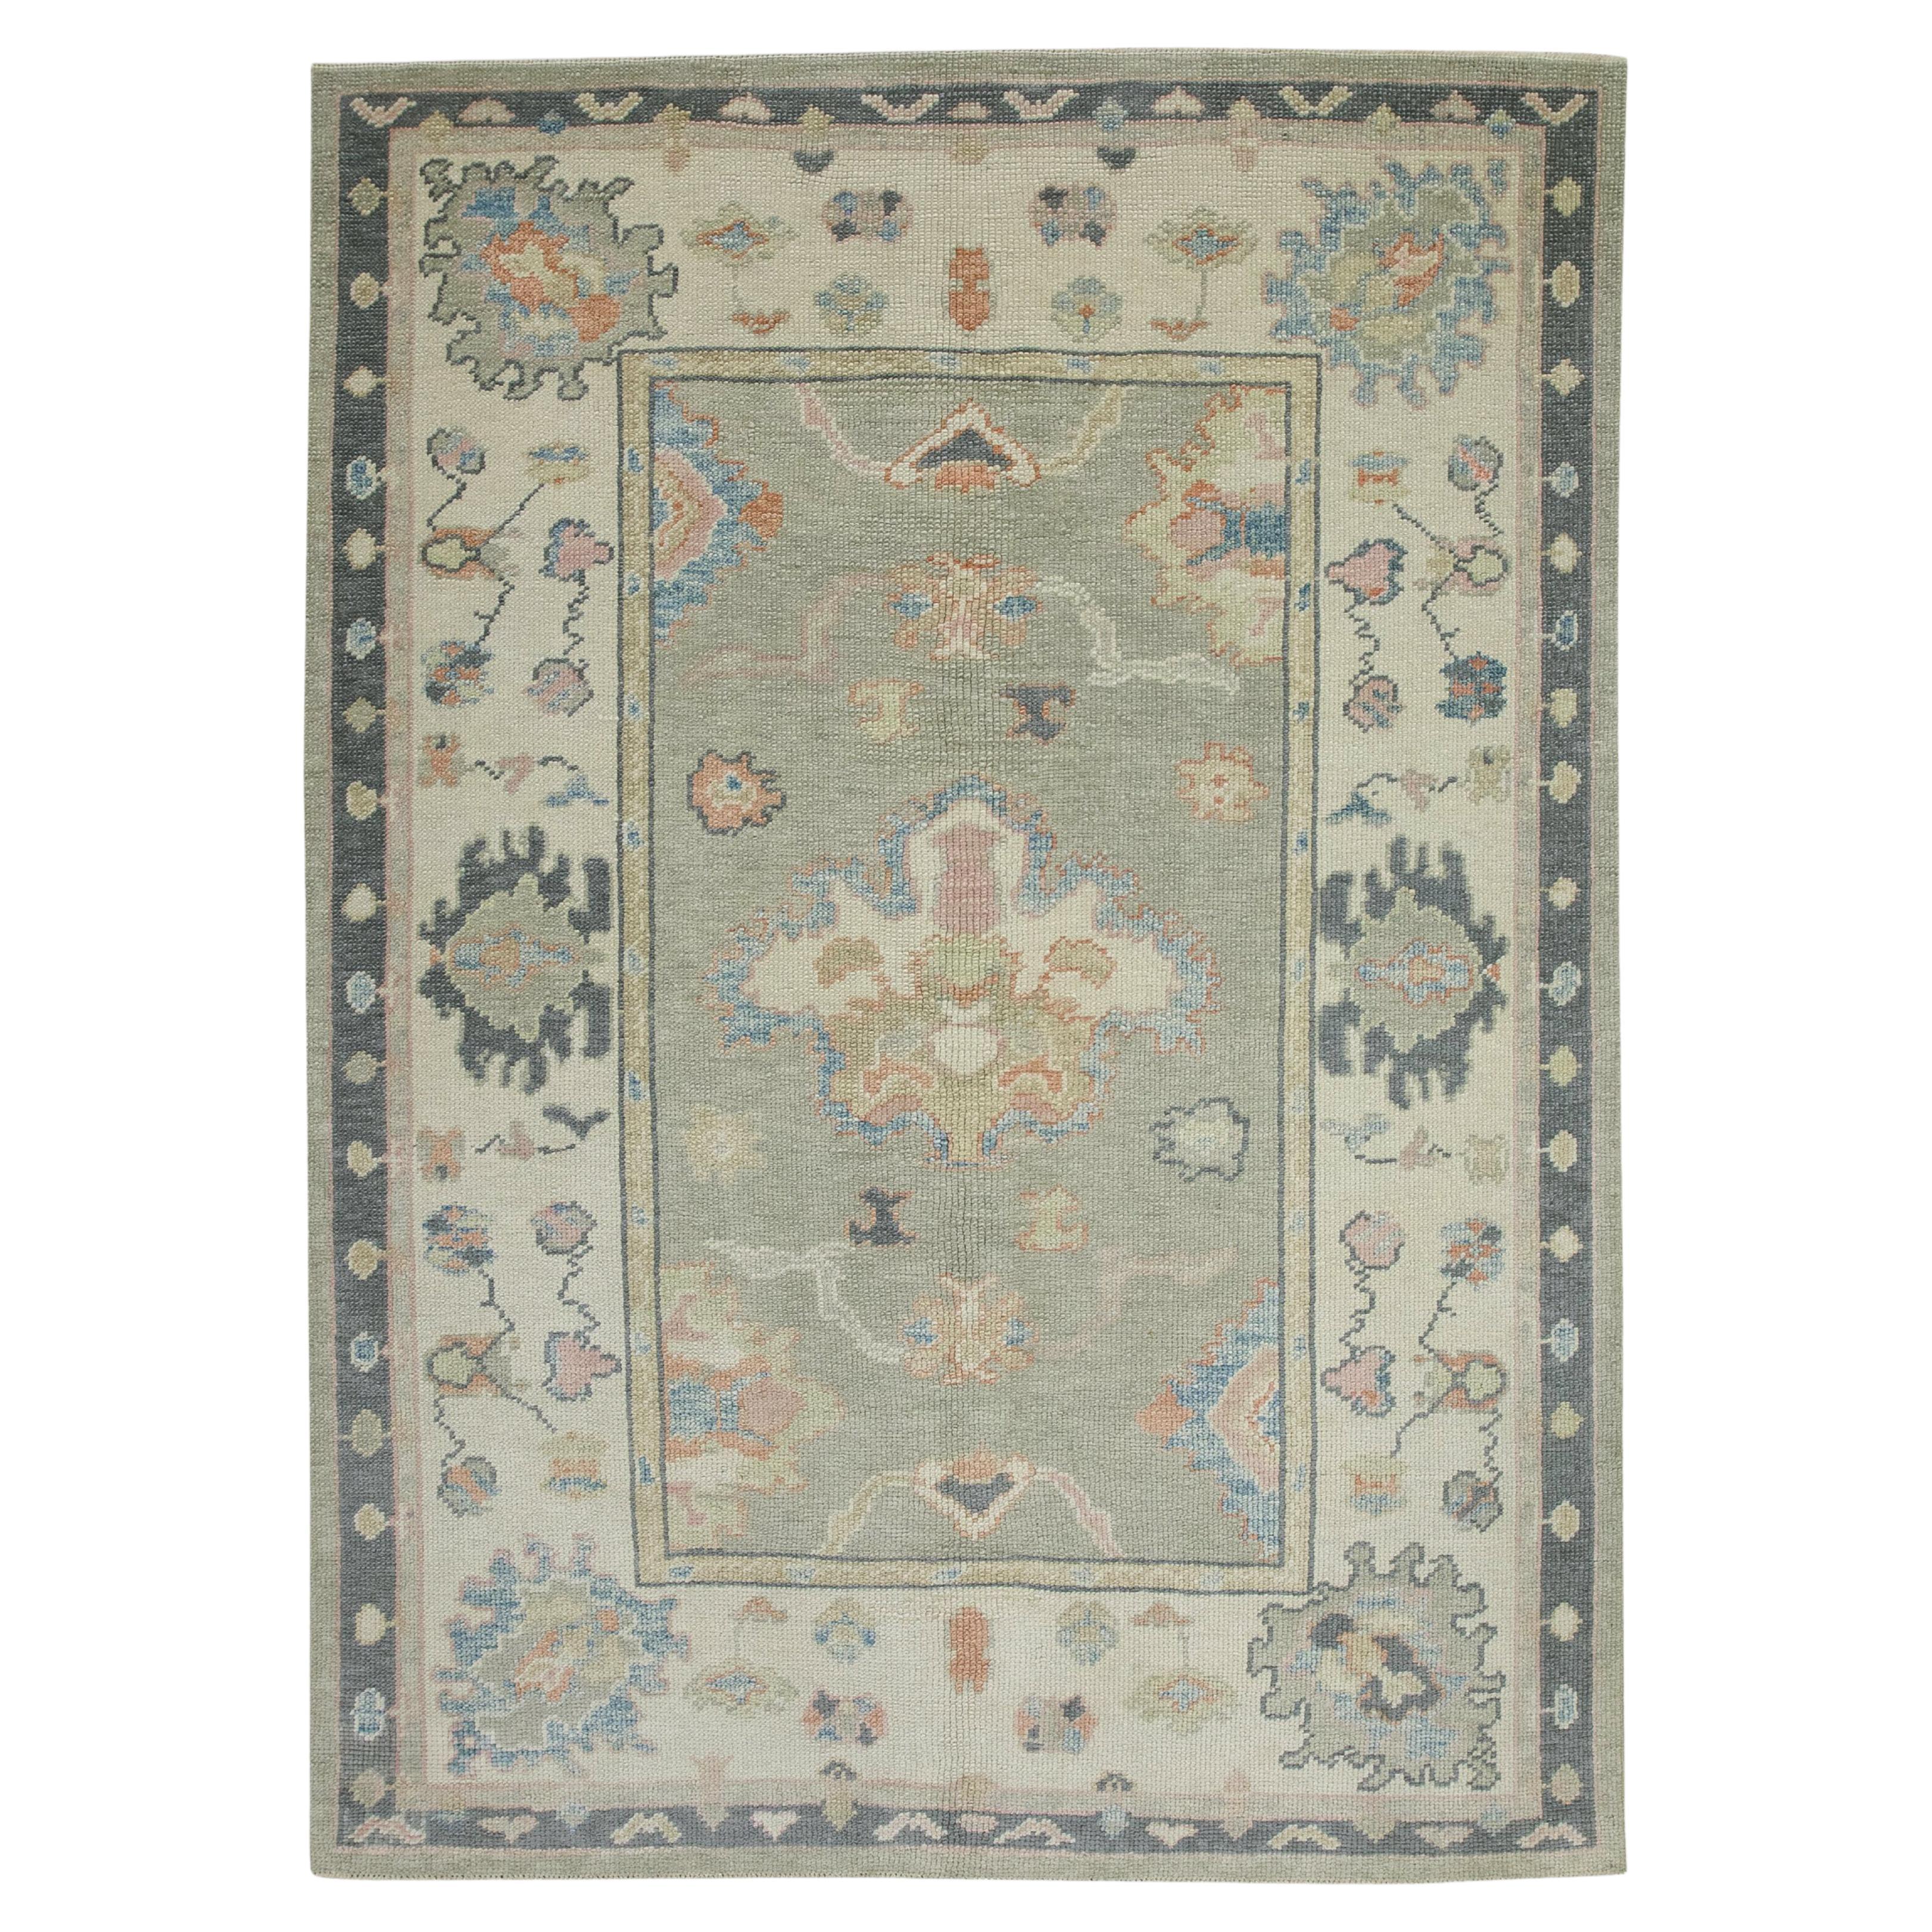 Green & Charcoal Floral Design Handwoven Wool Turkish Oushak Rug 4'8" x 6'5"